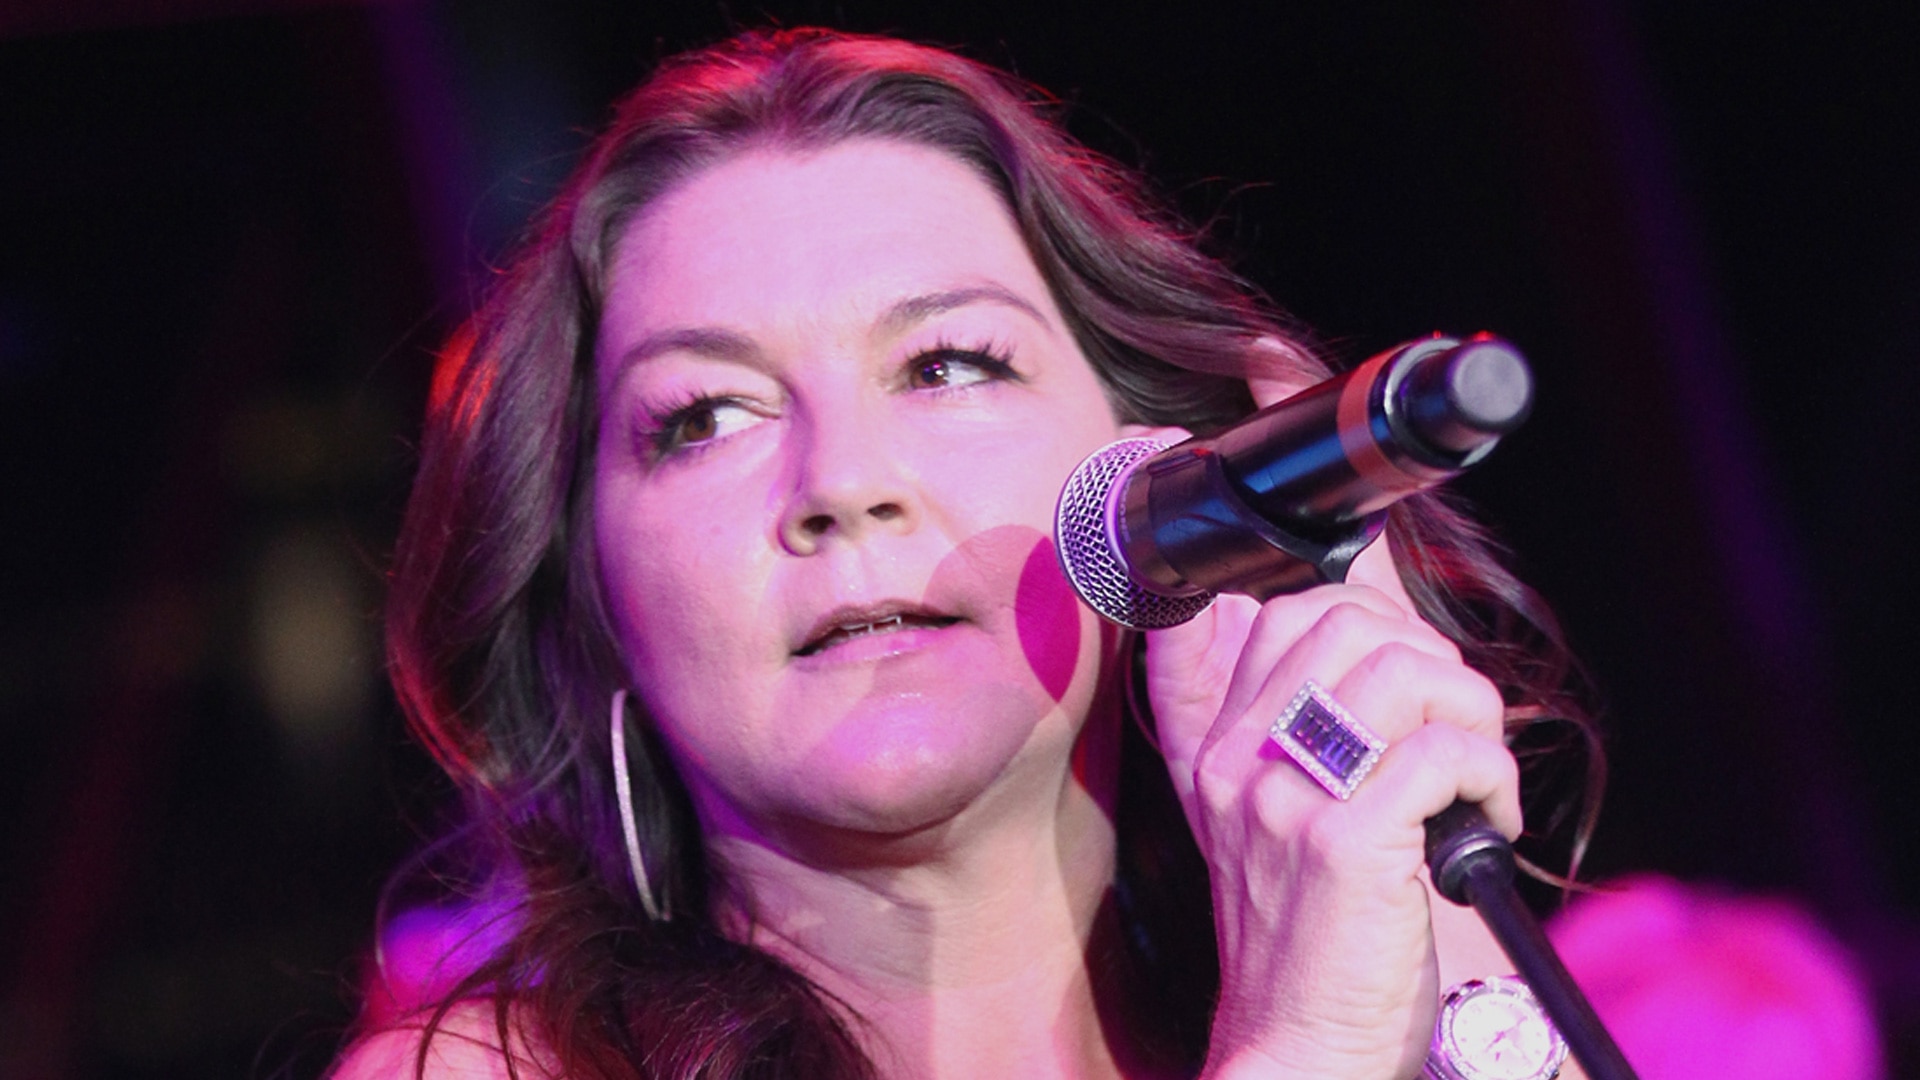 Watch Access Hollywood interview 'Country Singer Gretchen Wilson Arres...